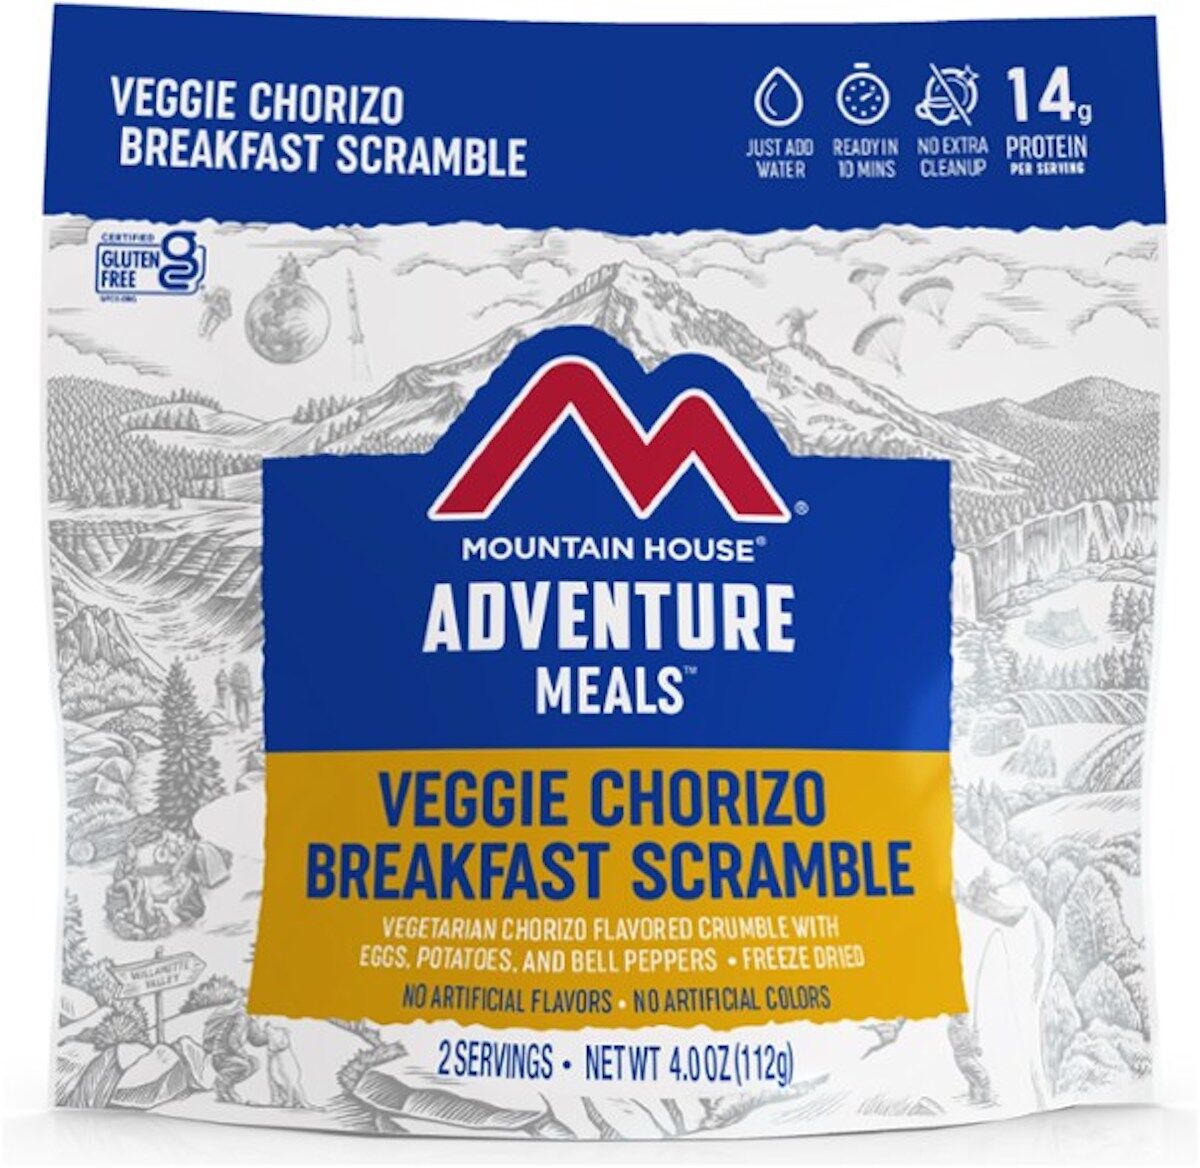 Packaging for the Adventure Meals breakfast scramble